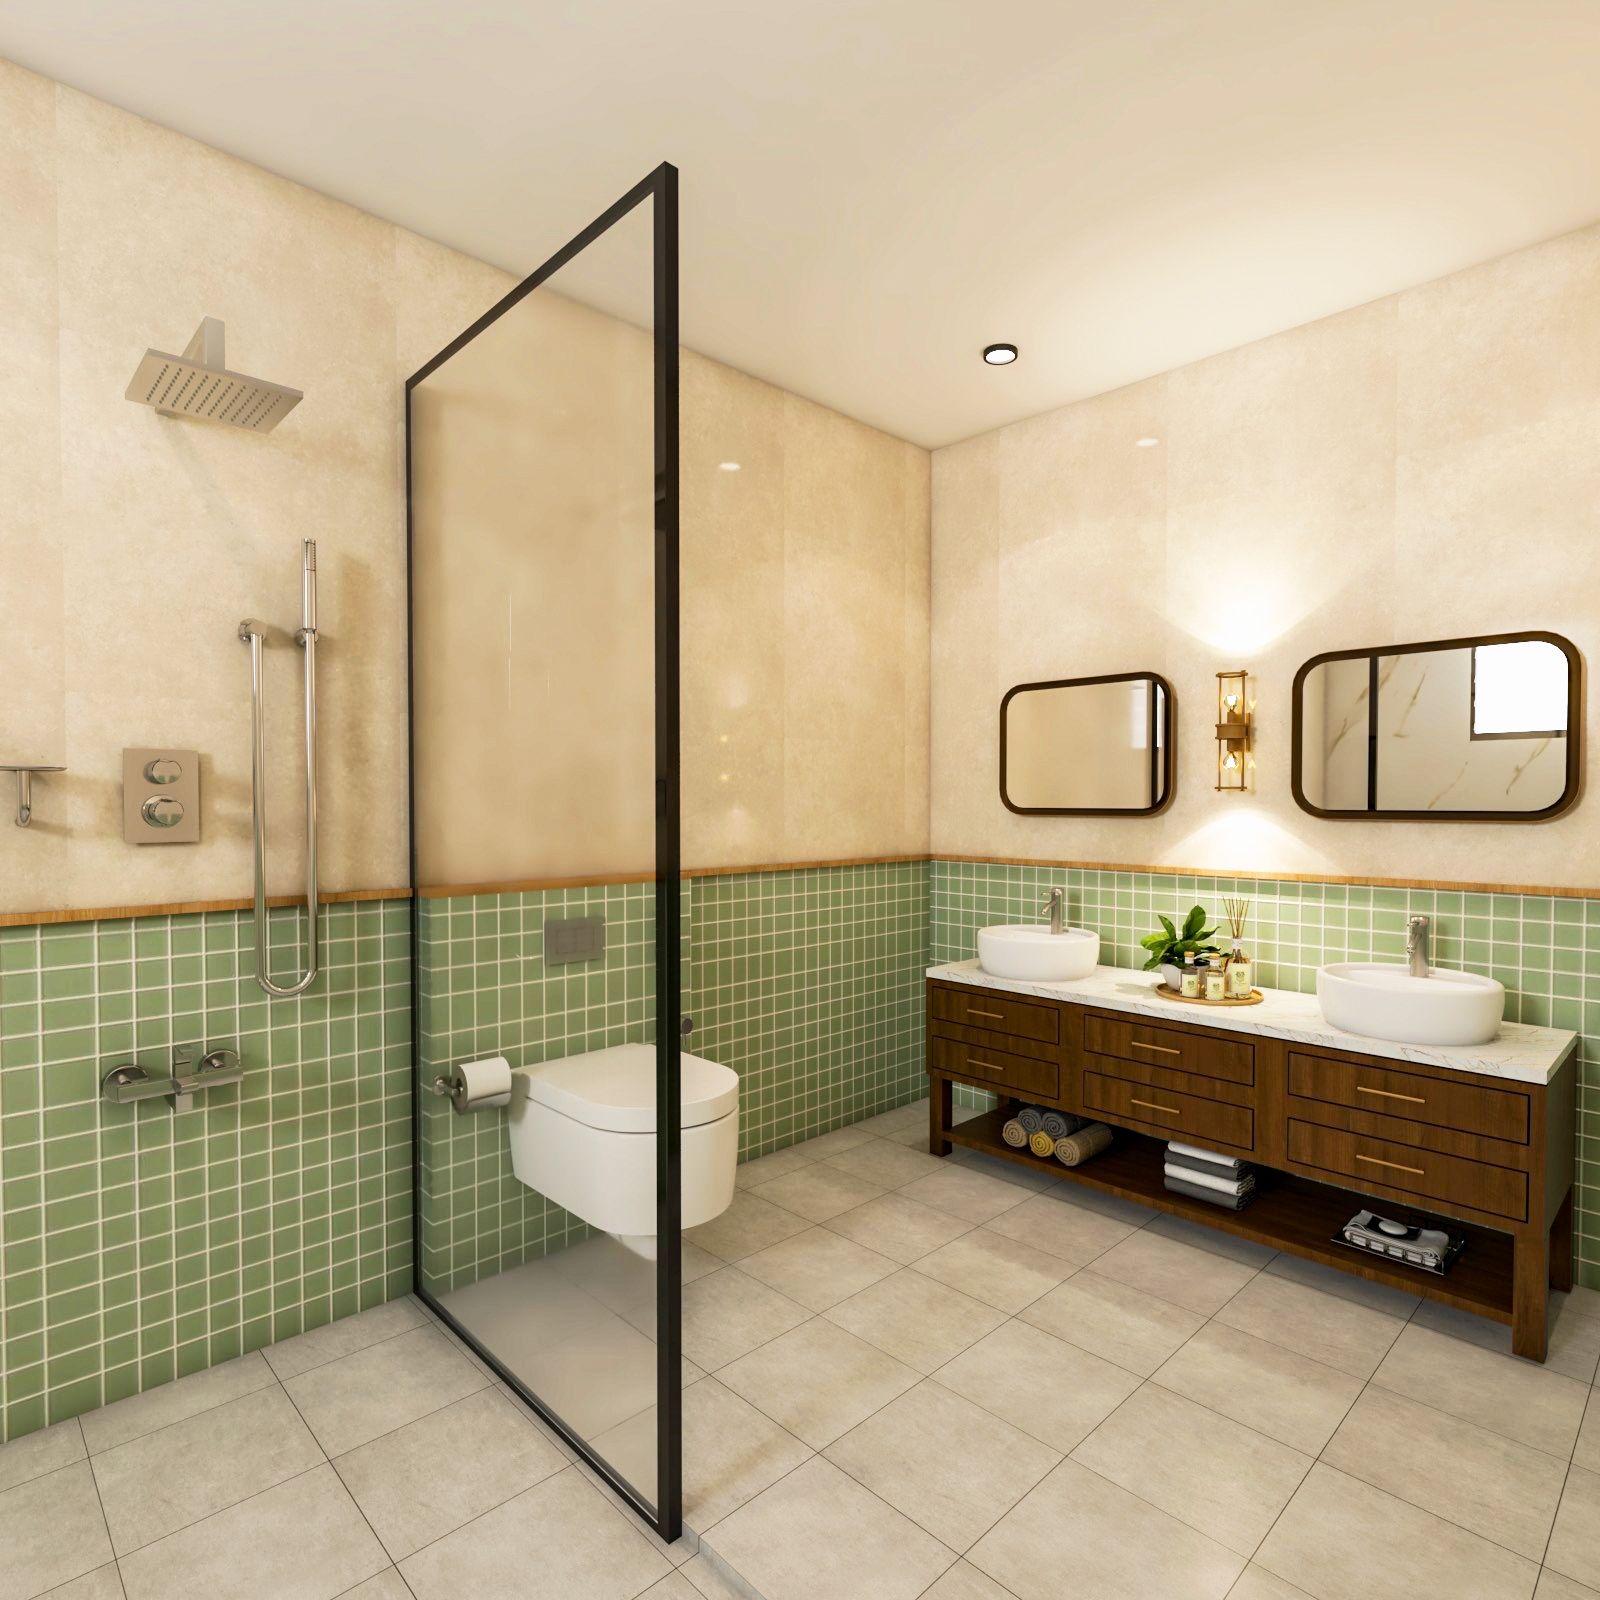 Classic Bathroom Interior Design With Beige And Green Tiles